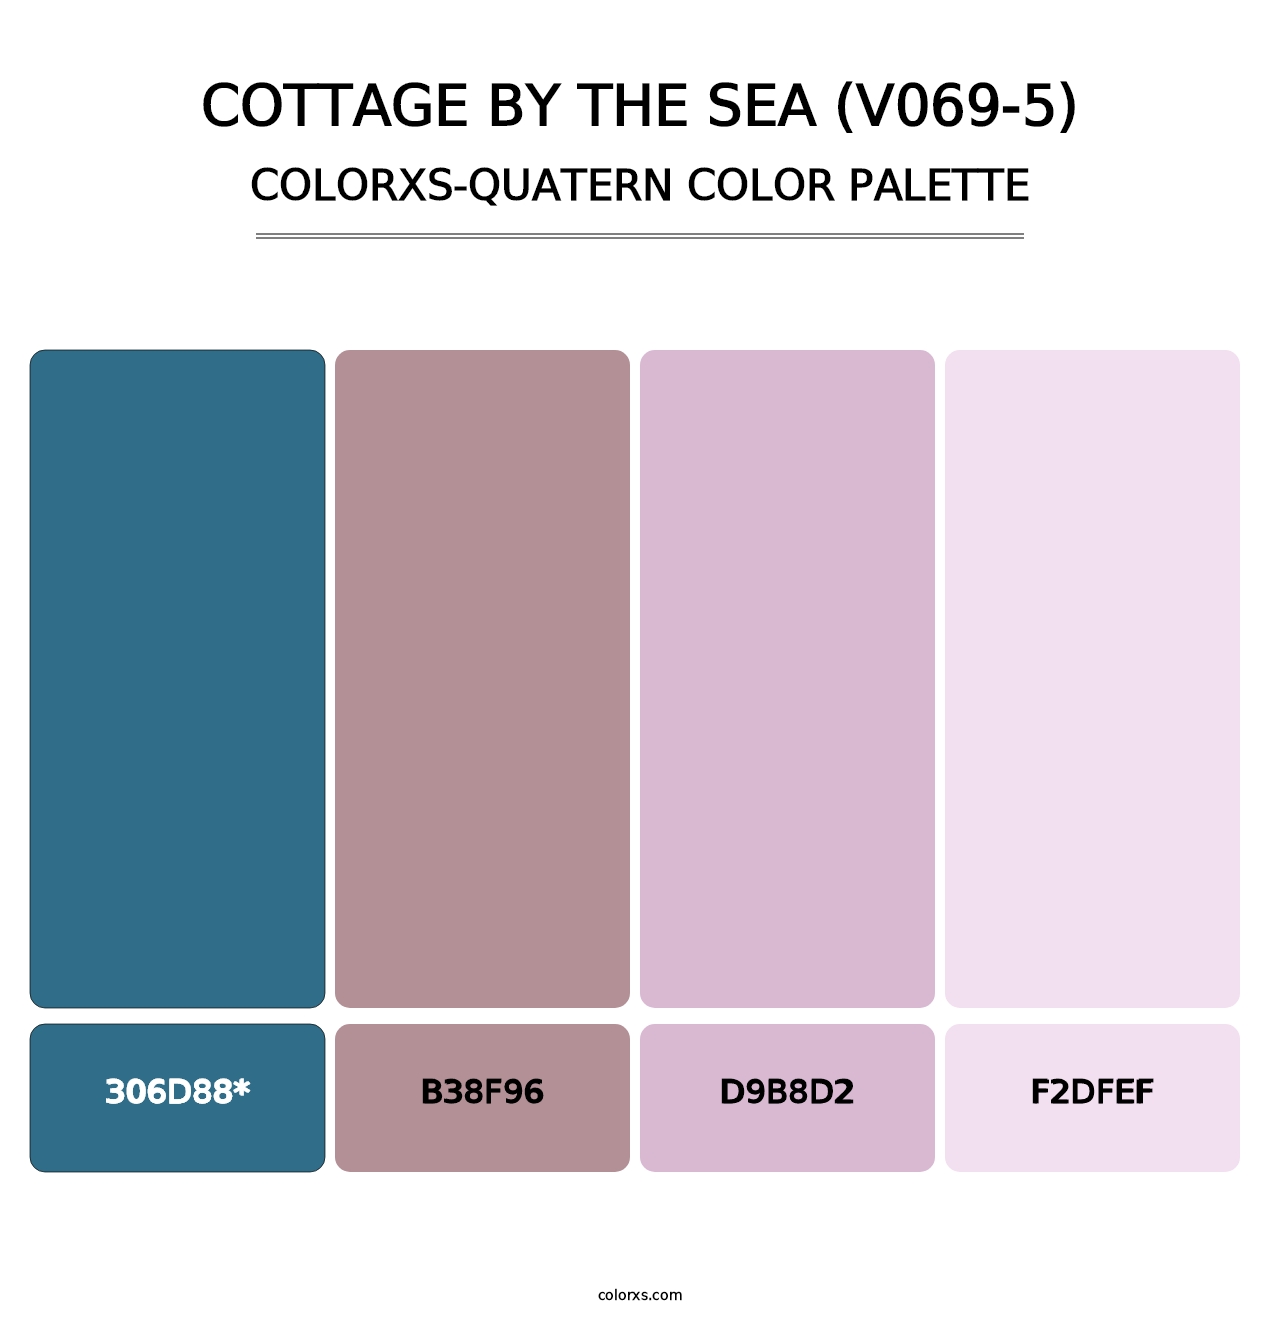 Cottage by the Sea (V069-5) - Colorxs Quatern Palette